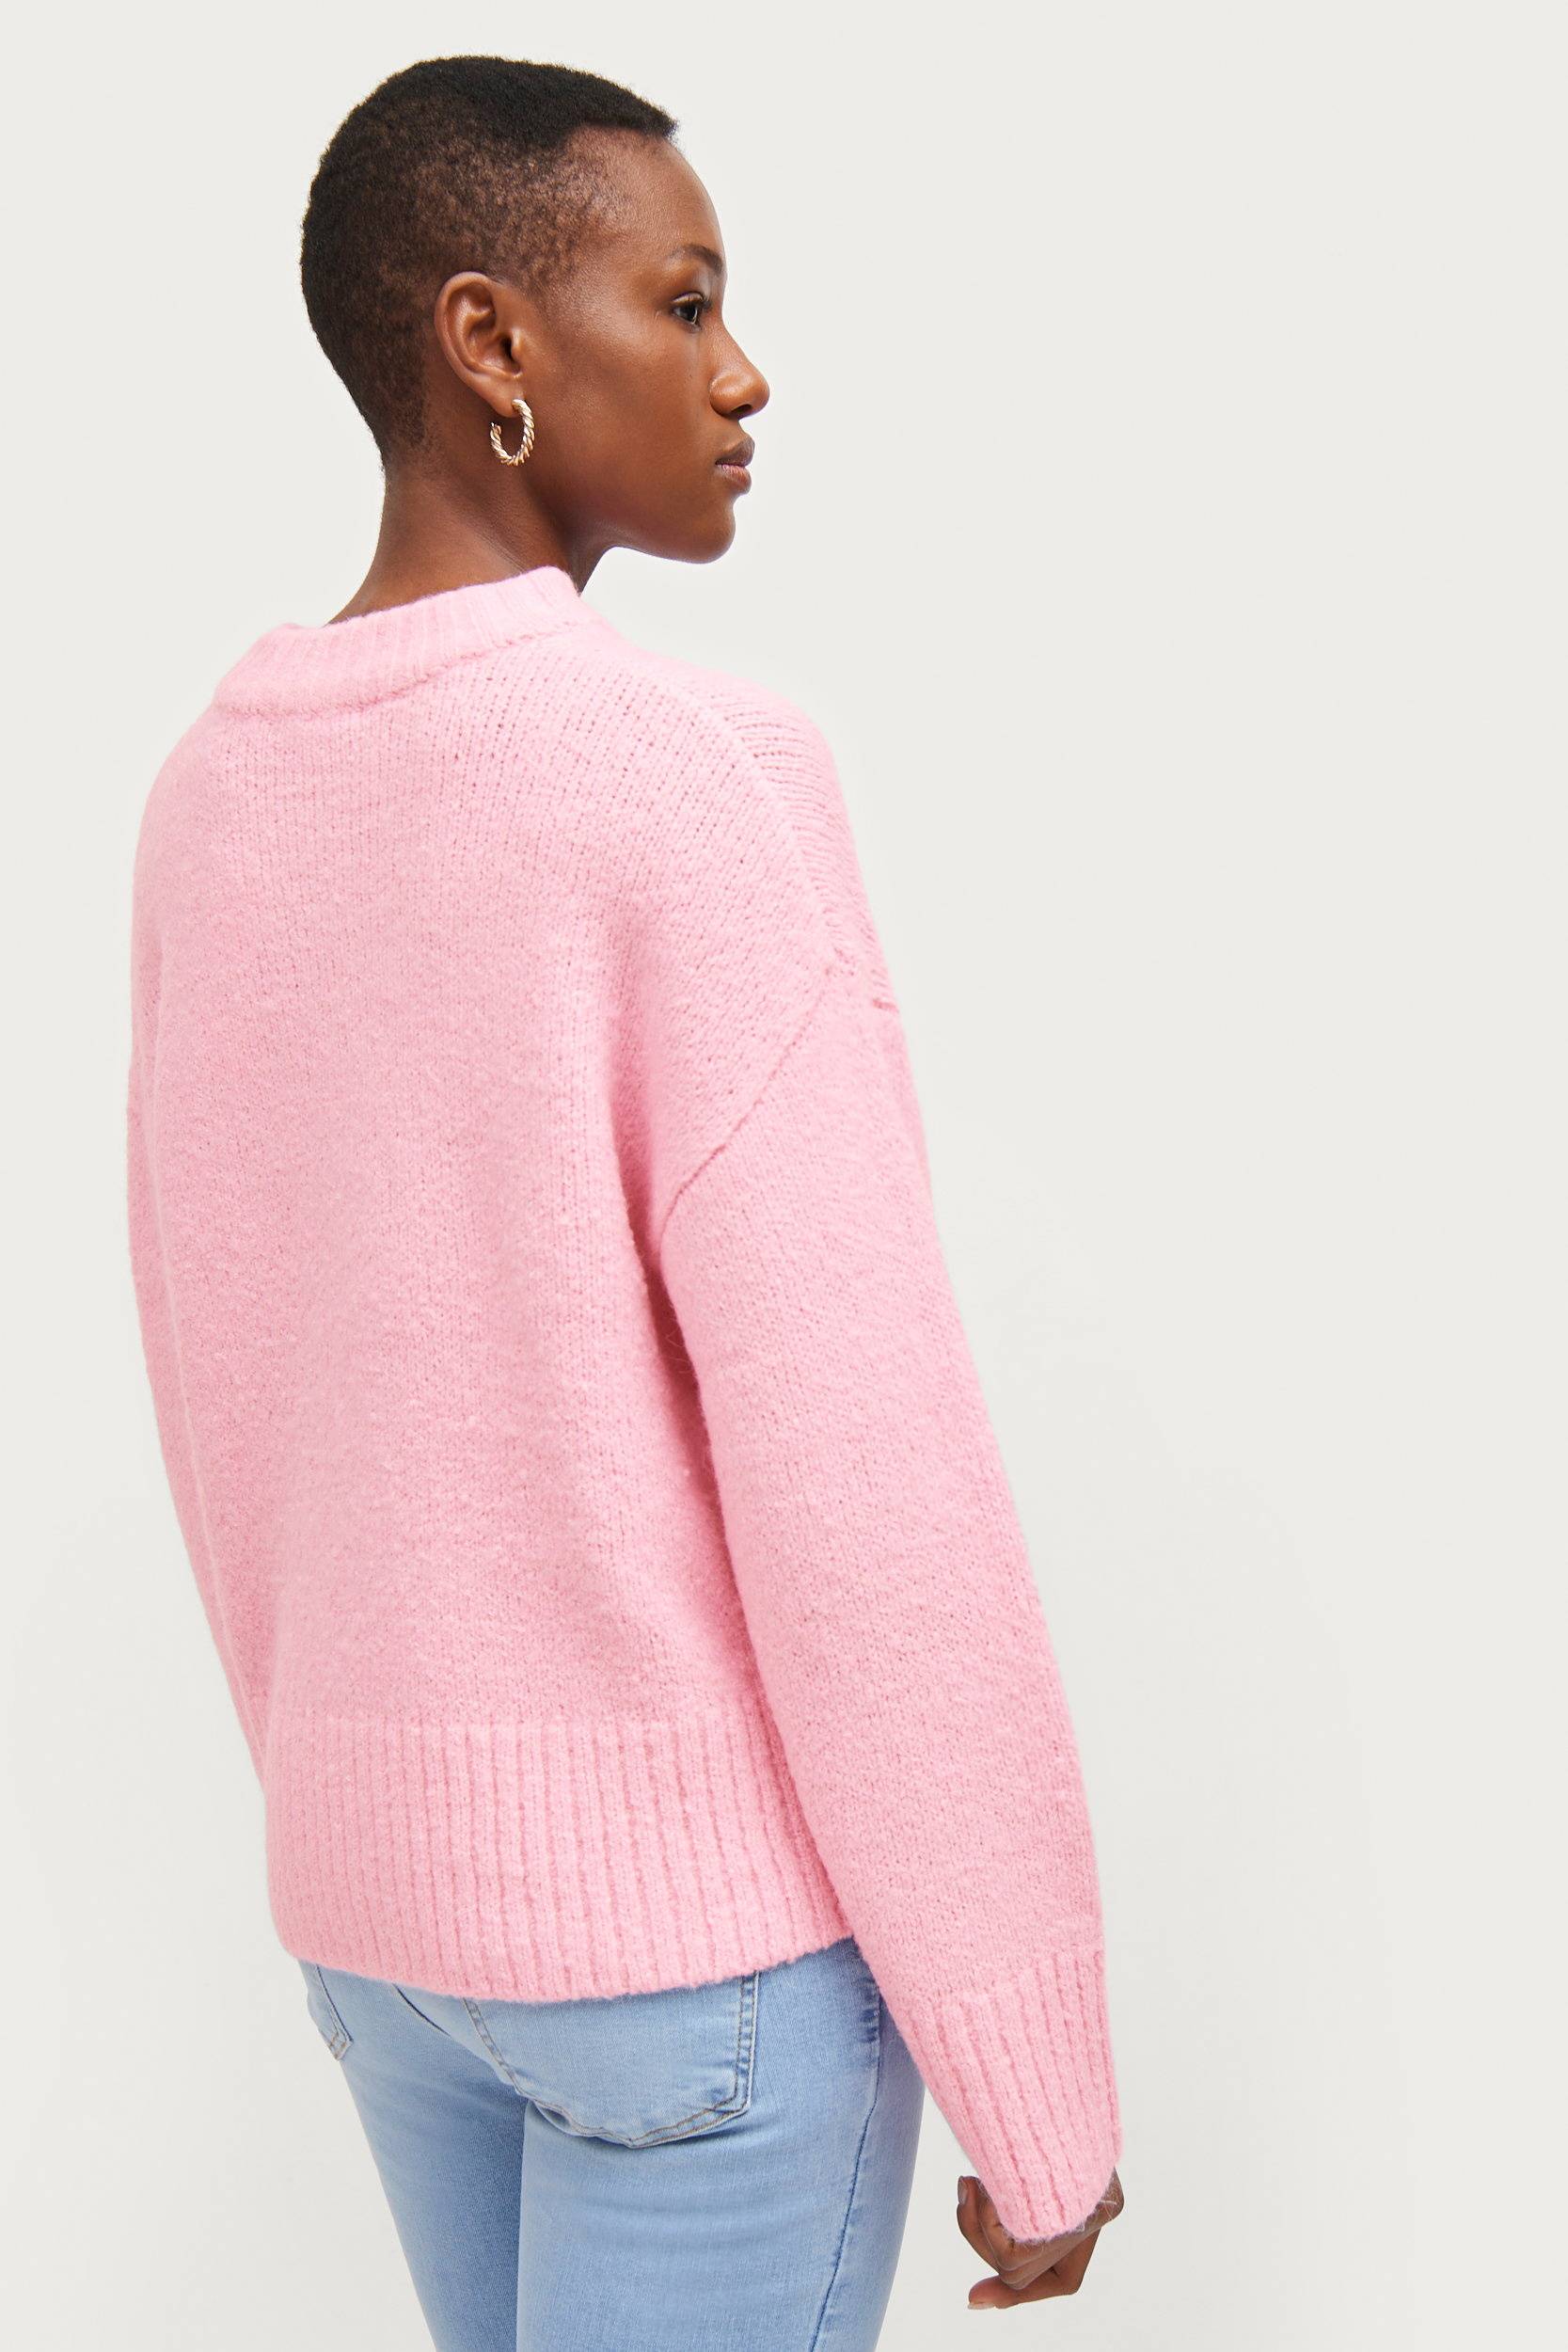 Gina Tricot Pullover Charlie 18943 Rosa Regular Fit